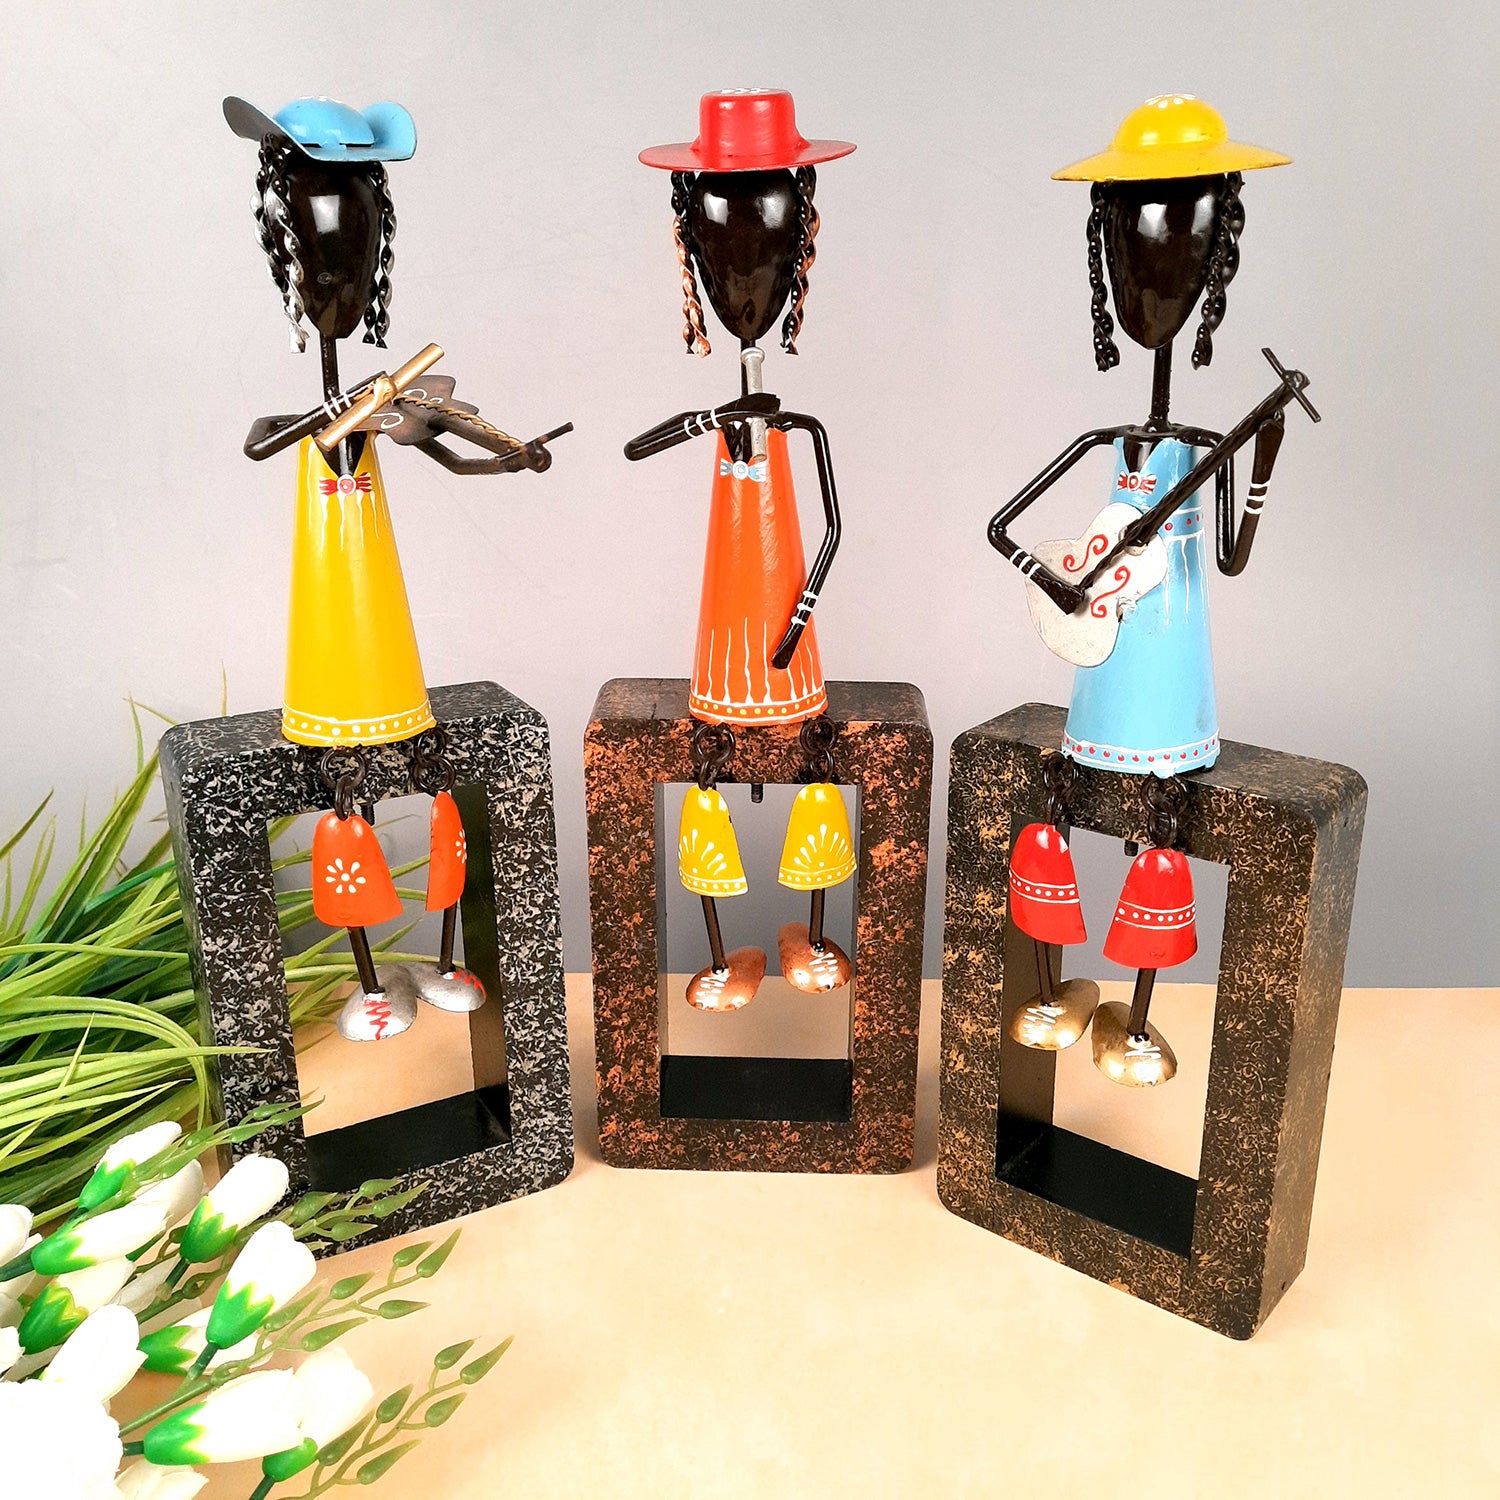 Musician Showpiece Cum Wall Hanging | Figurines Playing Musical Instruments With Hanging Legs | Decorative Showpieces - For Home, Table, Living Room, TV Unit, Balcony, Wall Decor & Gifts - 16 Inch (Set of 3) - Apkamart